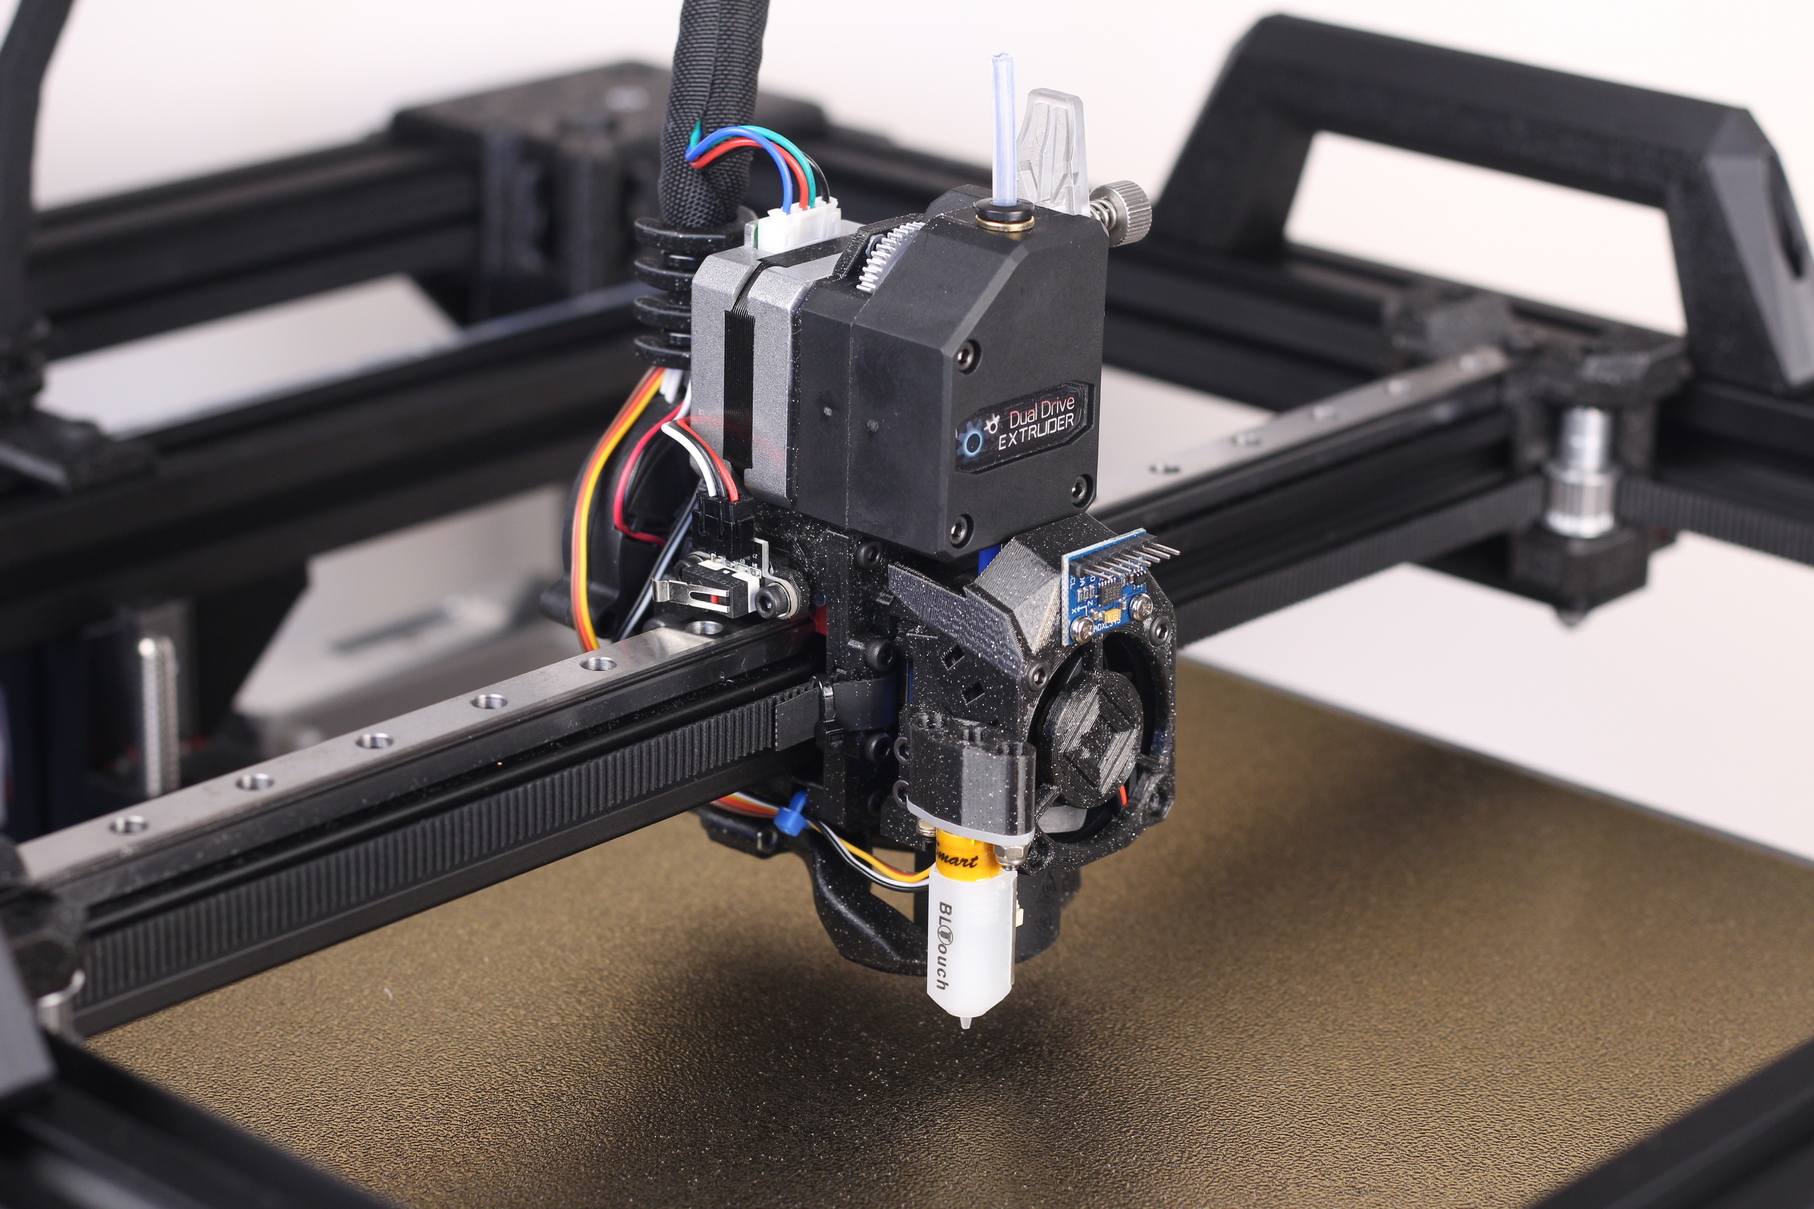 RatRig V Core 3 EVA mount with BMG and Dragonfly HIC 2 | RatRig V-Core 3 Review: Premium CoreXY 3D Printer Kit